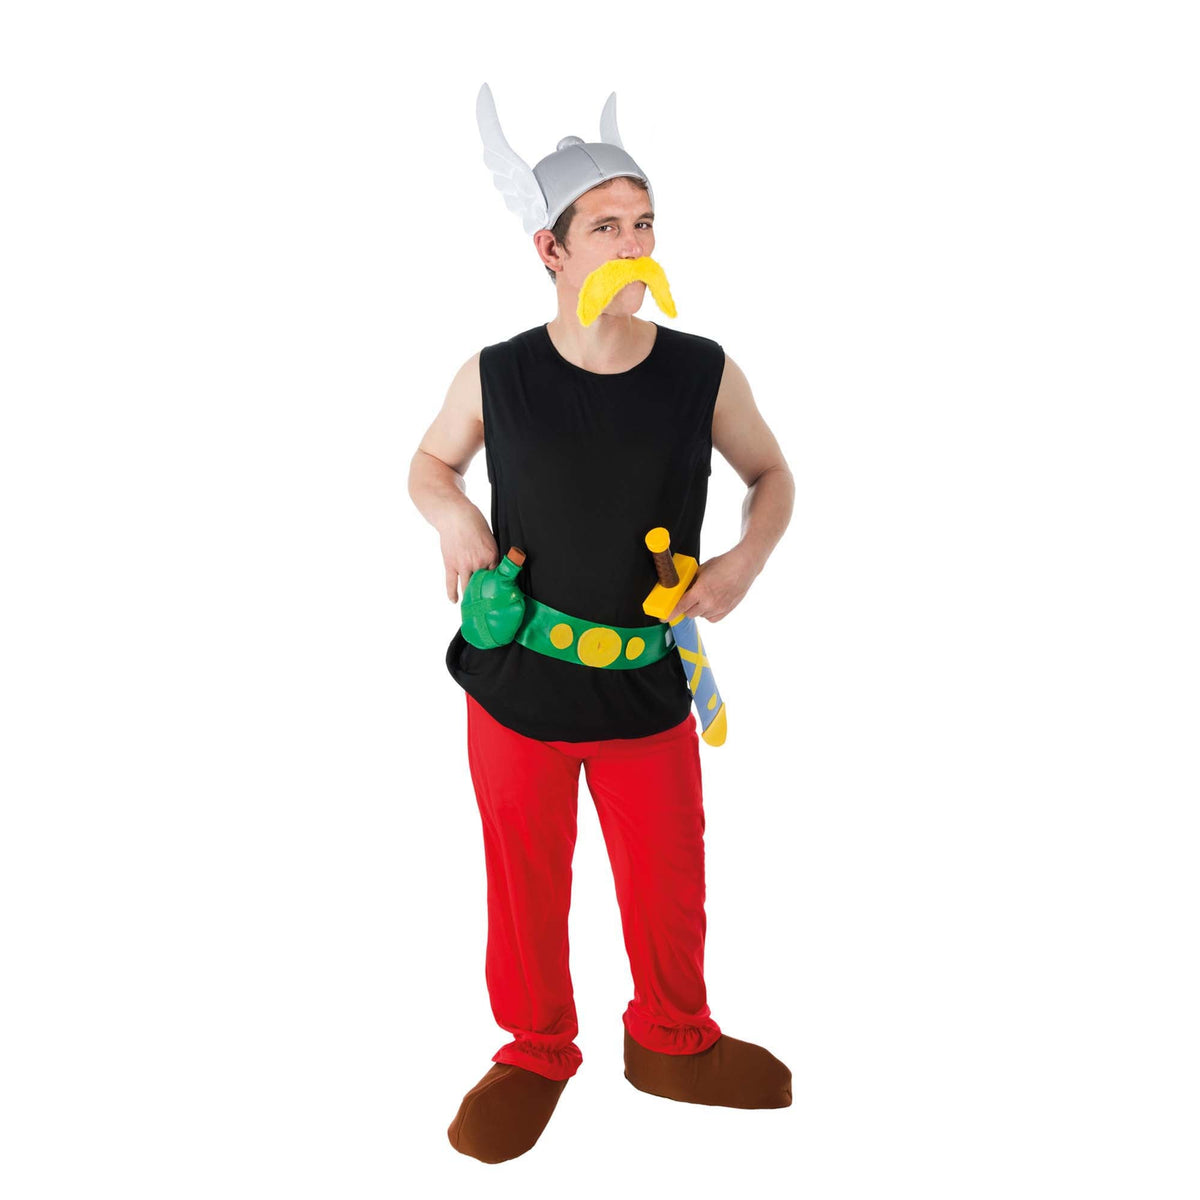 CHAKS Costumes Asterix Costume for Adults, Asterix and Obelix